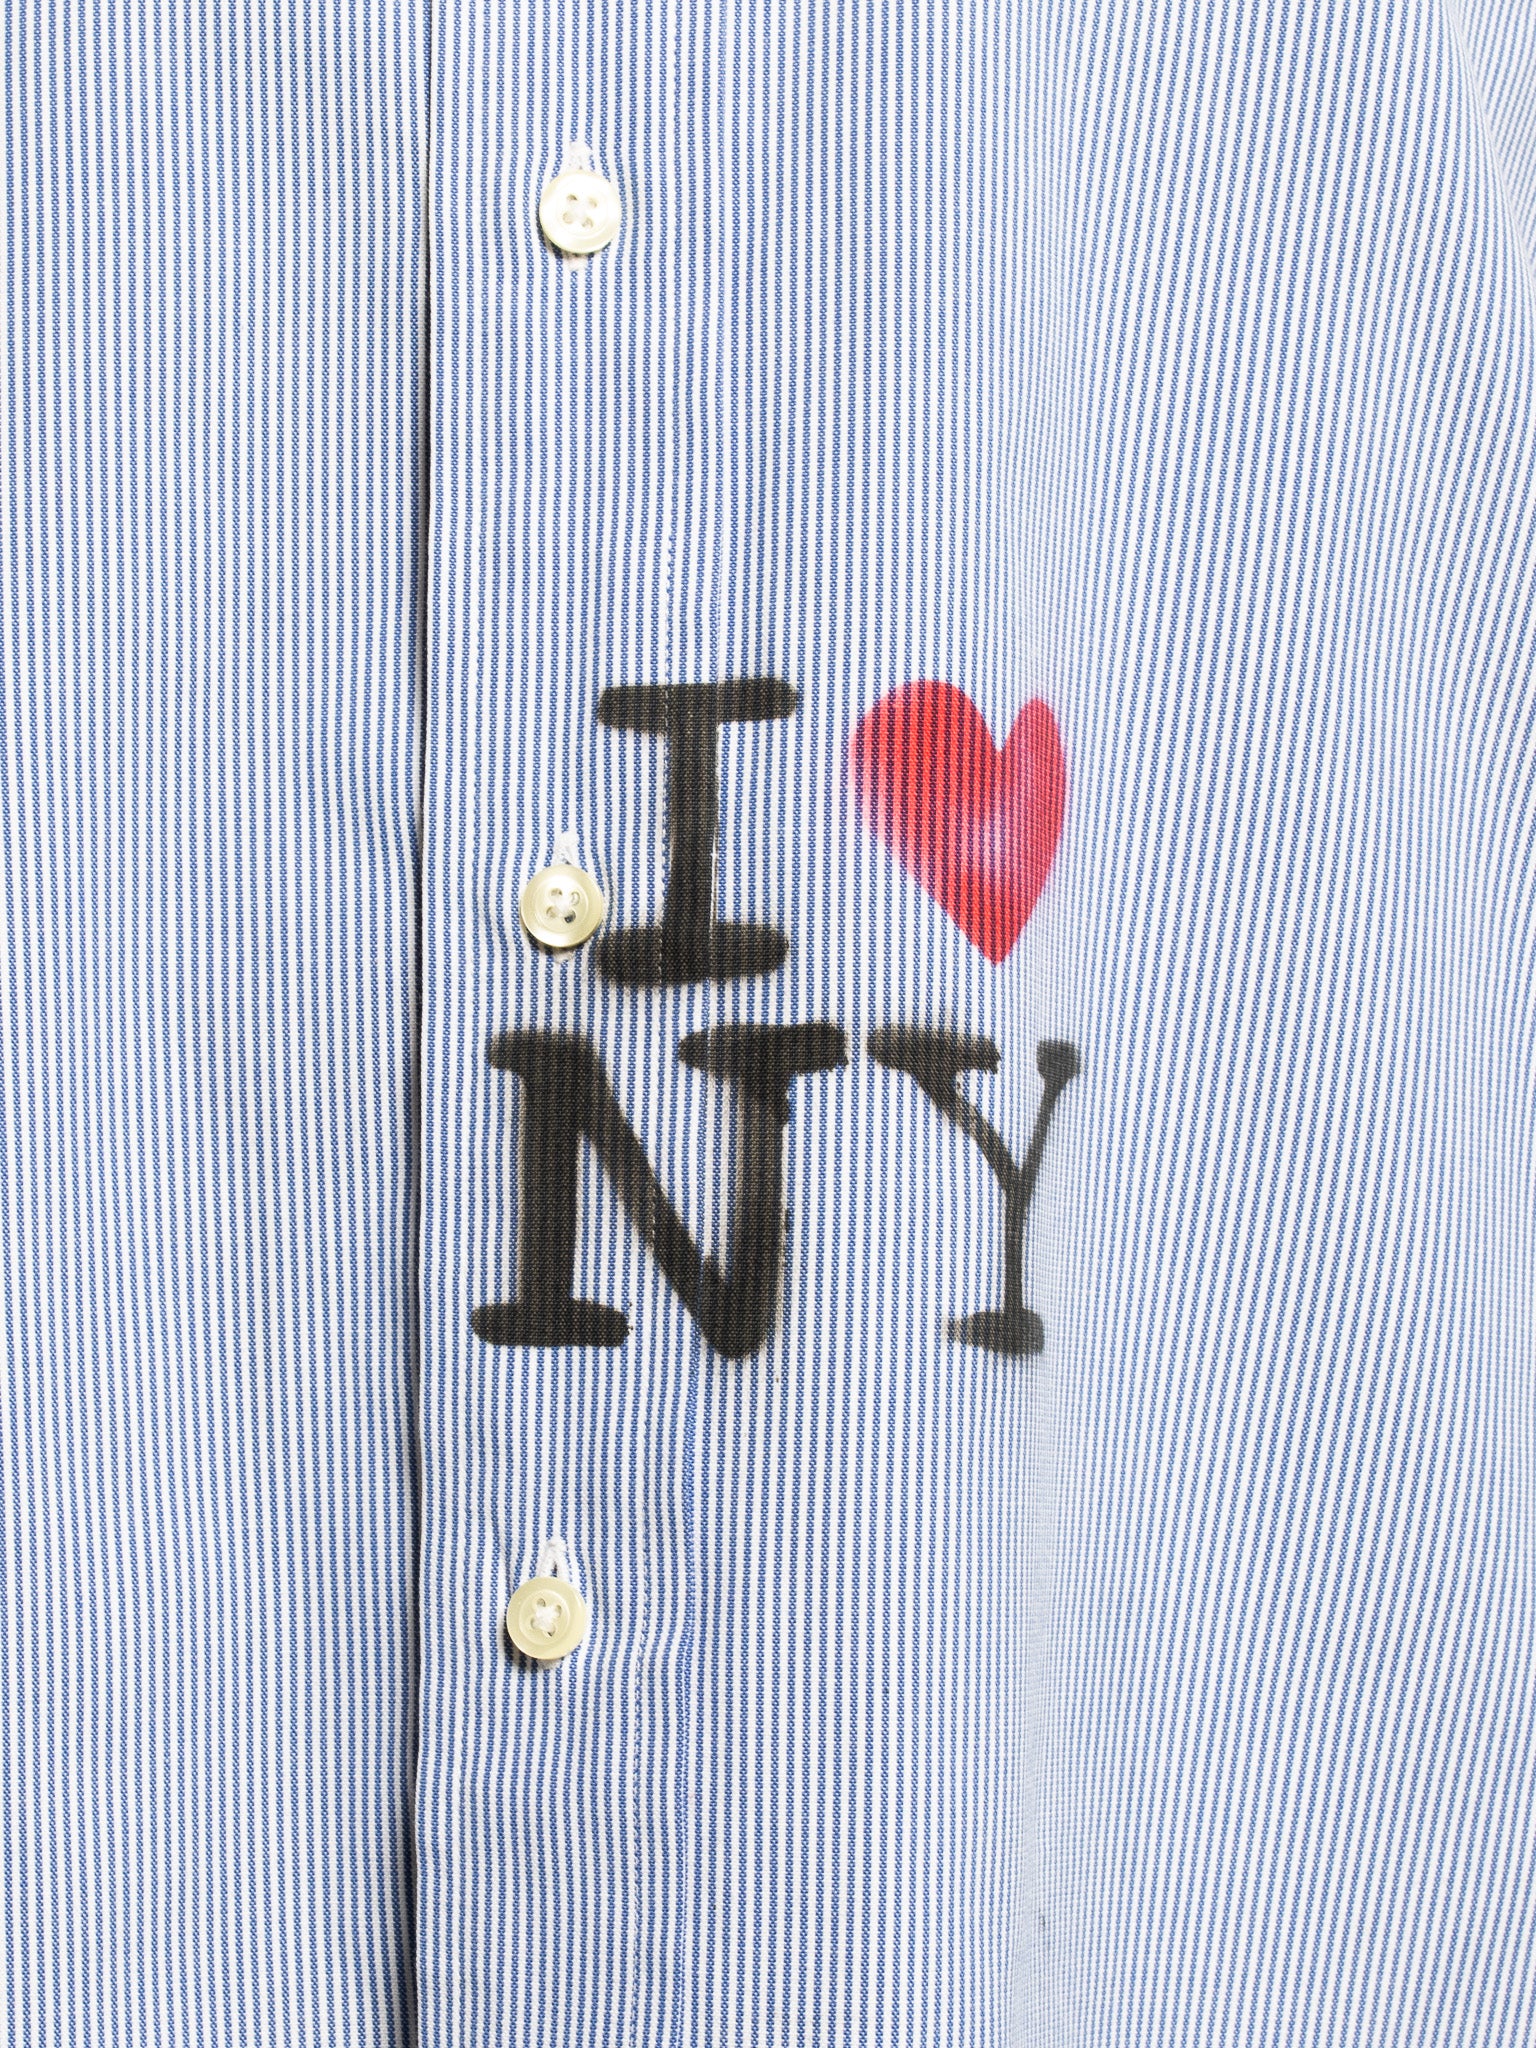 Femlord x BRZ - "I Love NY" Pinstripe Button Up (4X)